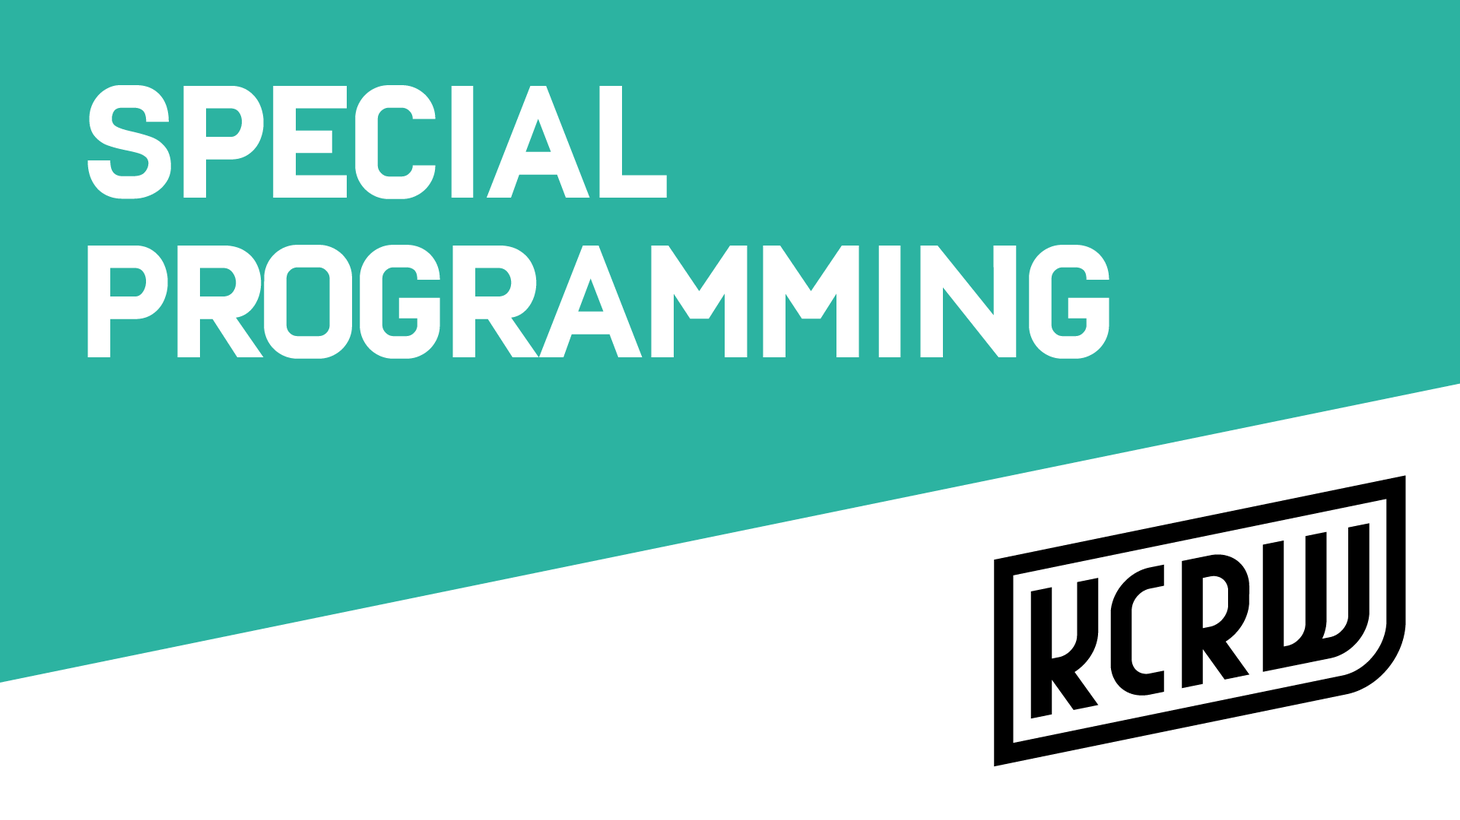 A collection of KCRW's best original programming from 2014.